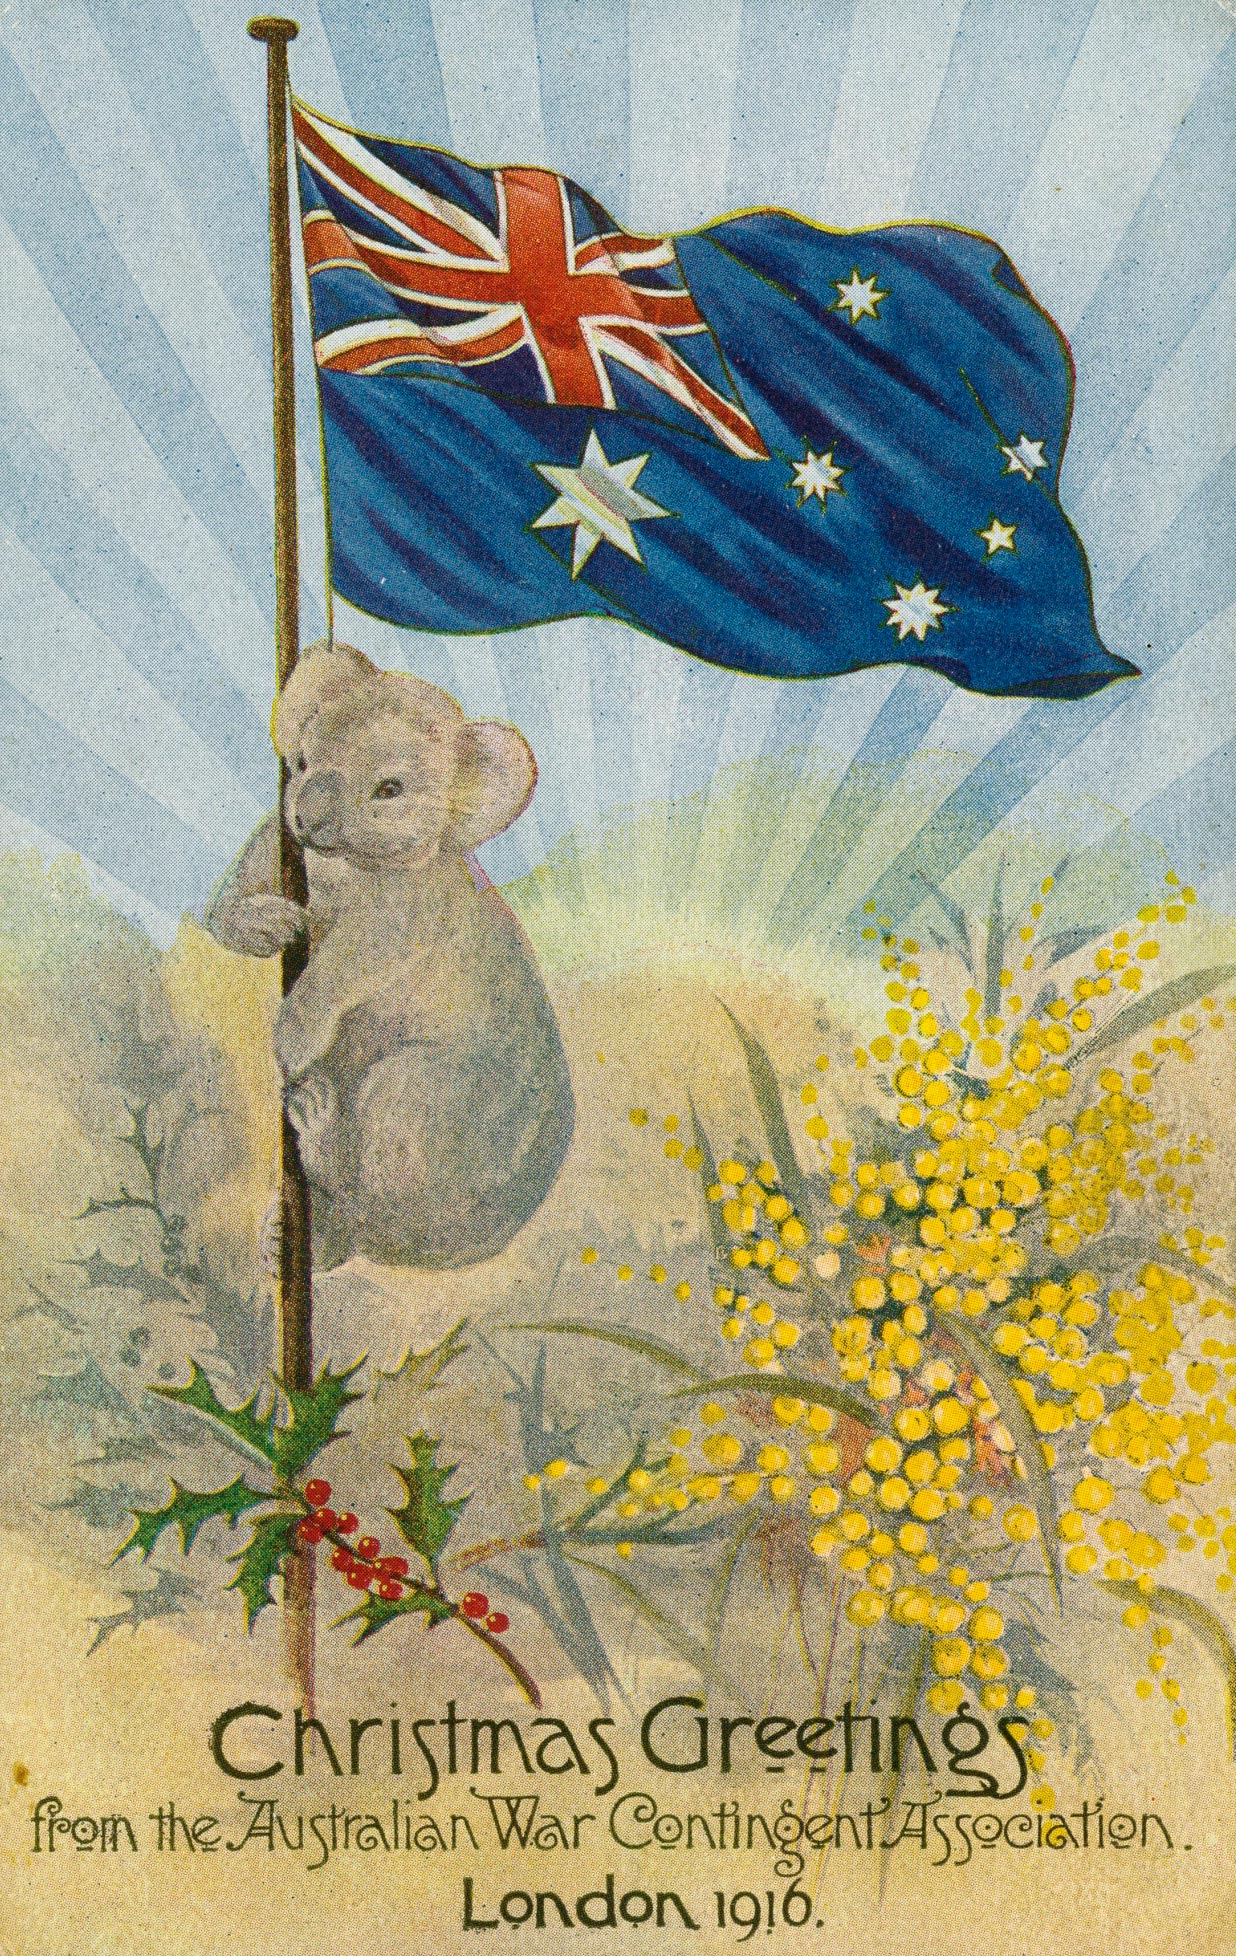 ‘Christmas greetings from the Australian War Contingent Association’ postcard, 1916
